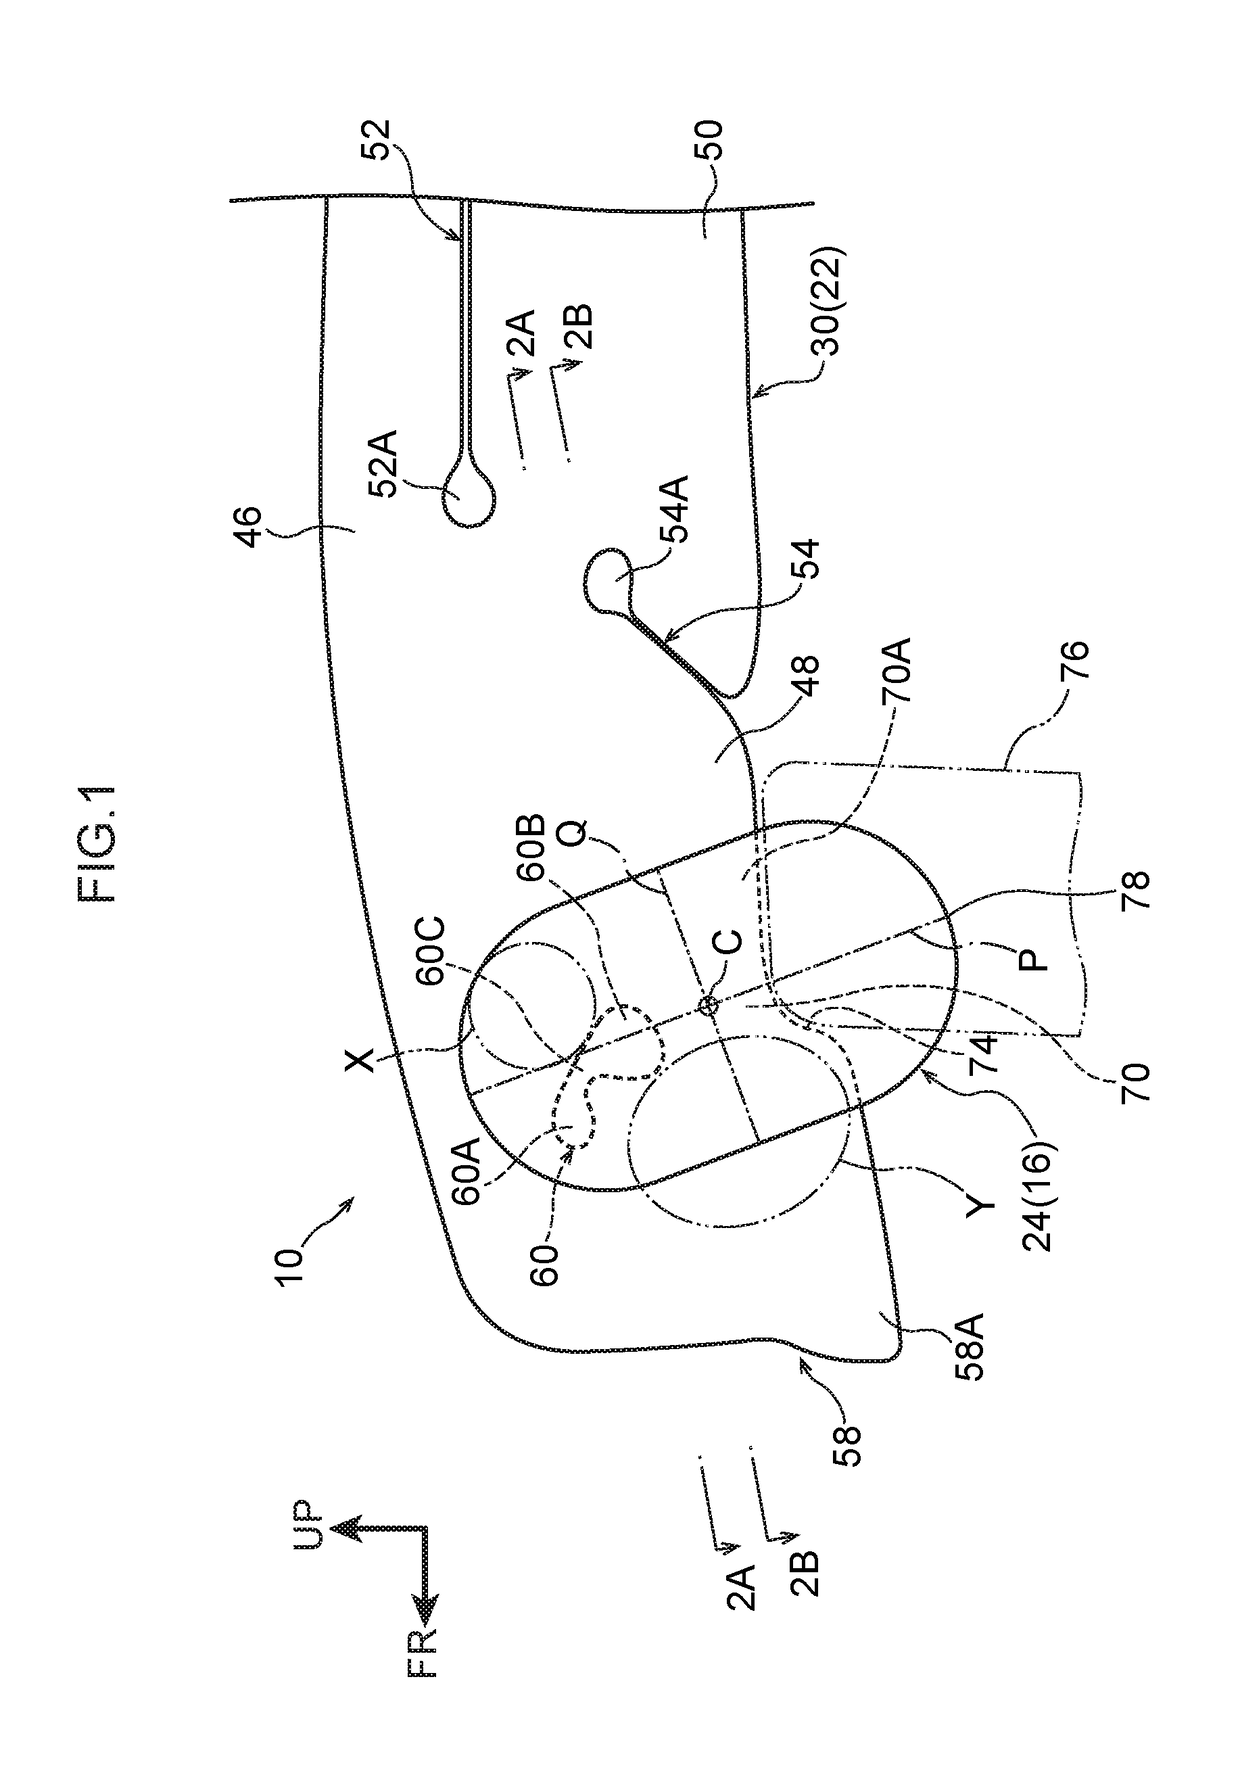 Automobile occupant protection device